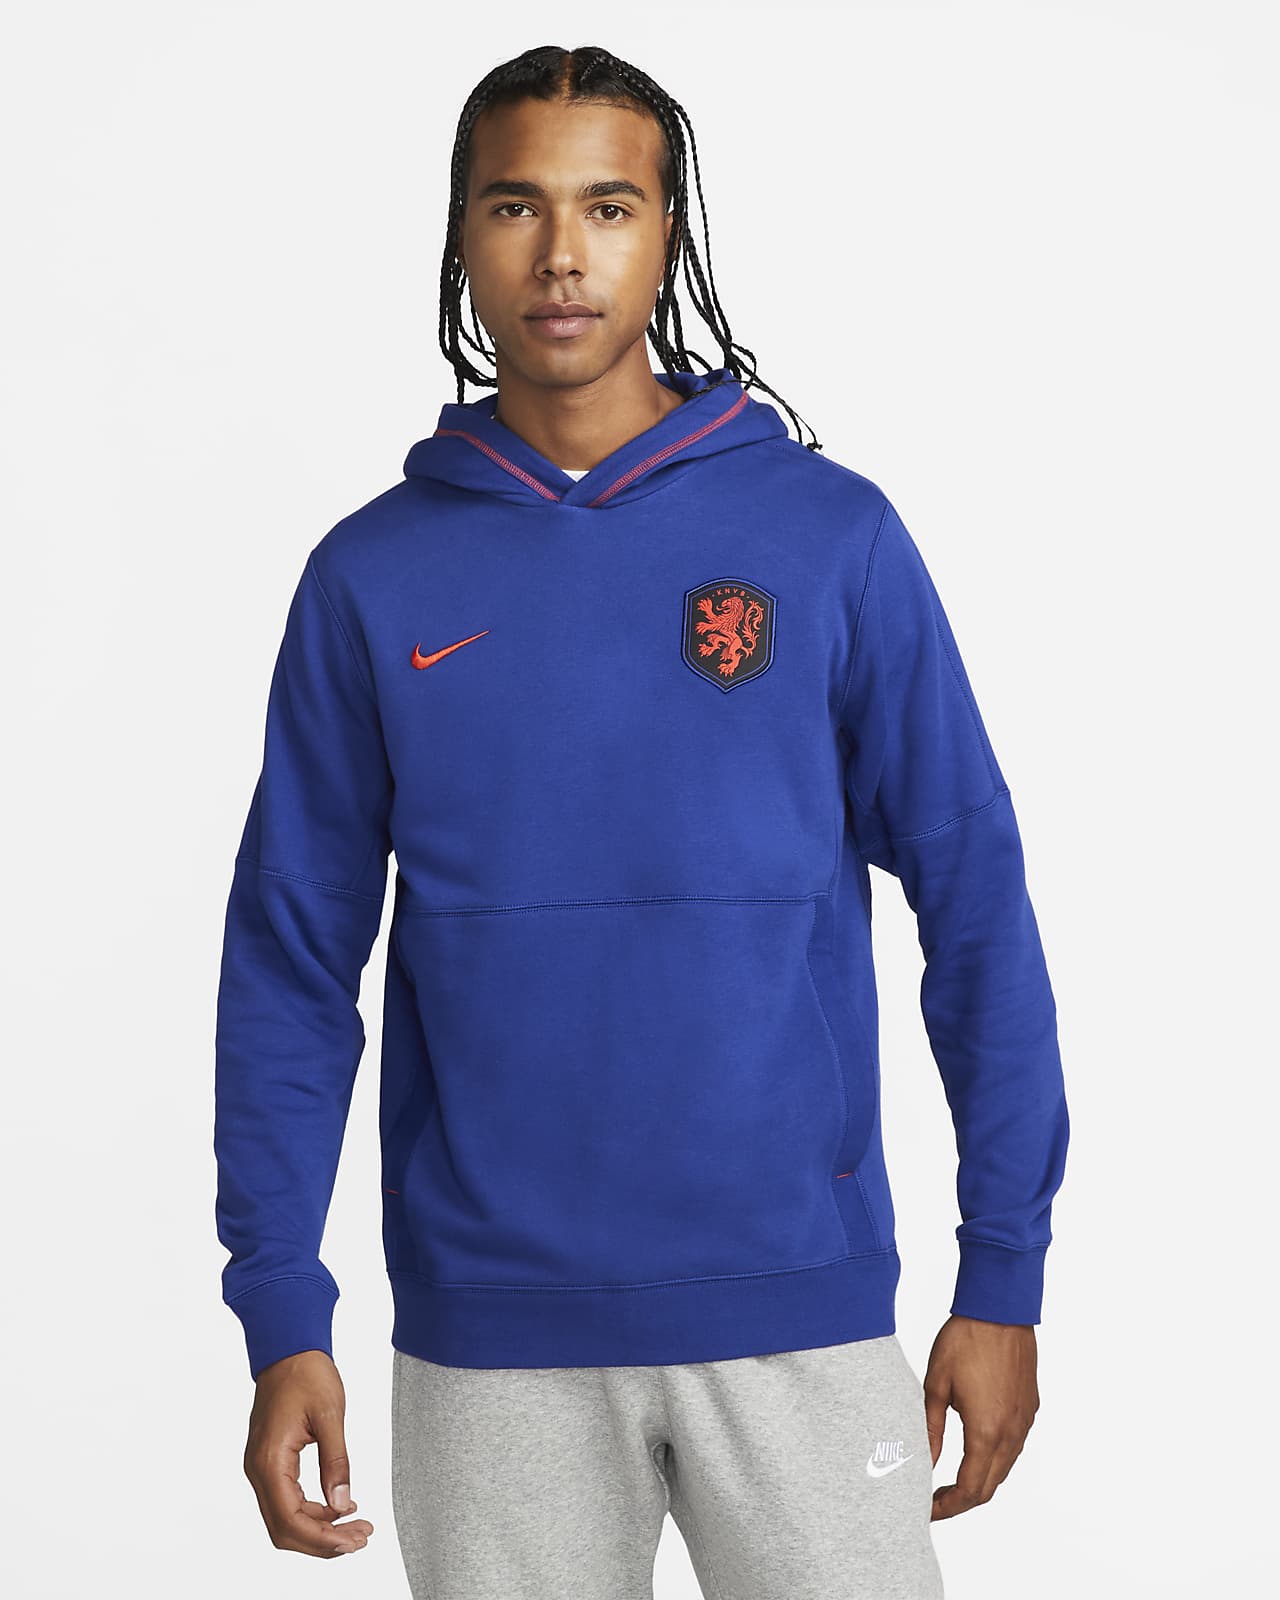 Netherlands Men's French Terry Football Hoodie